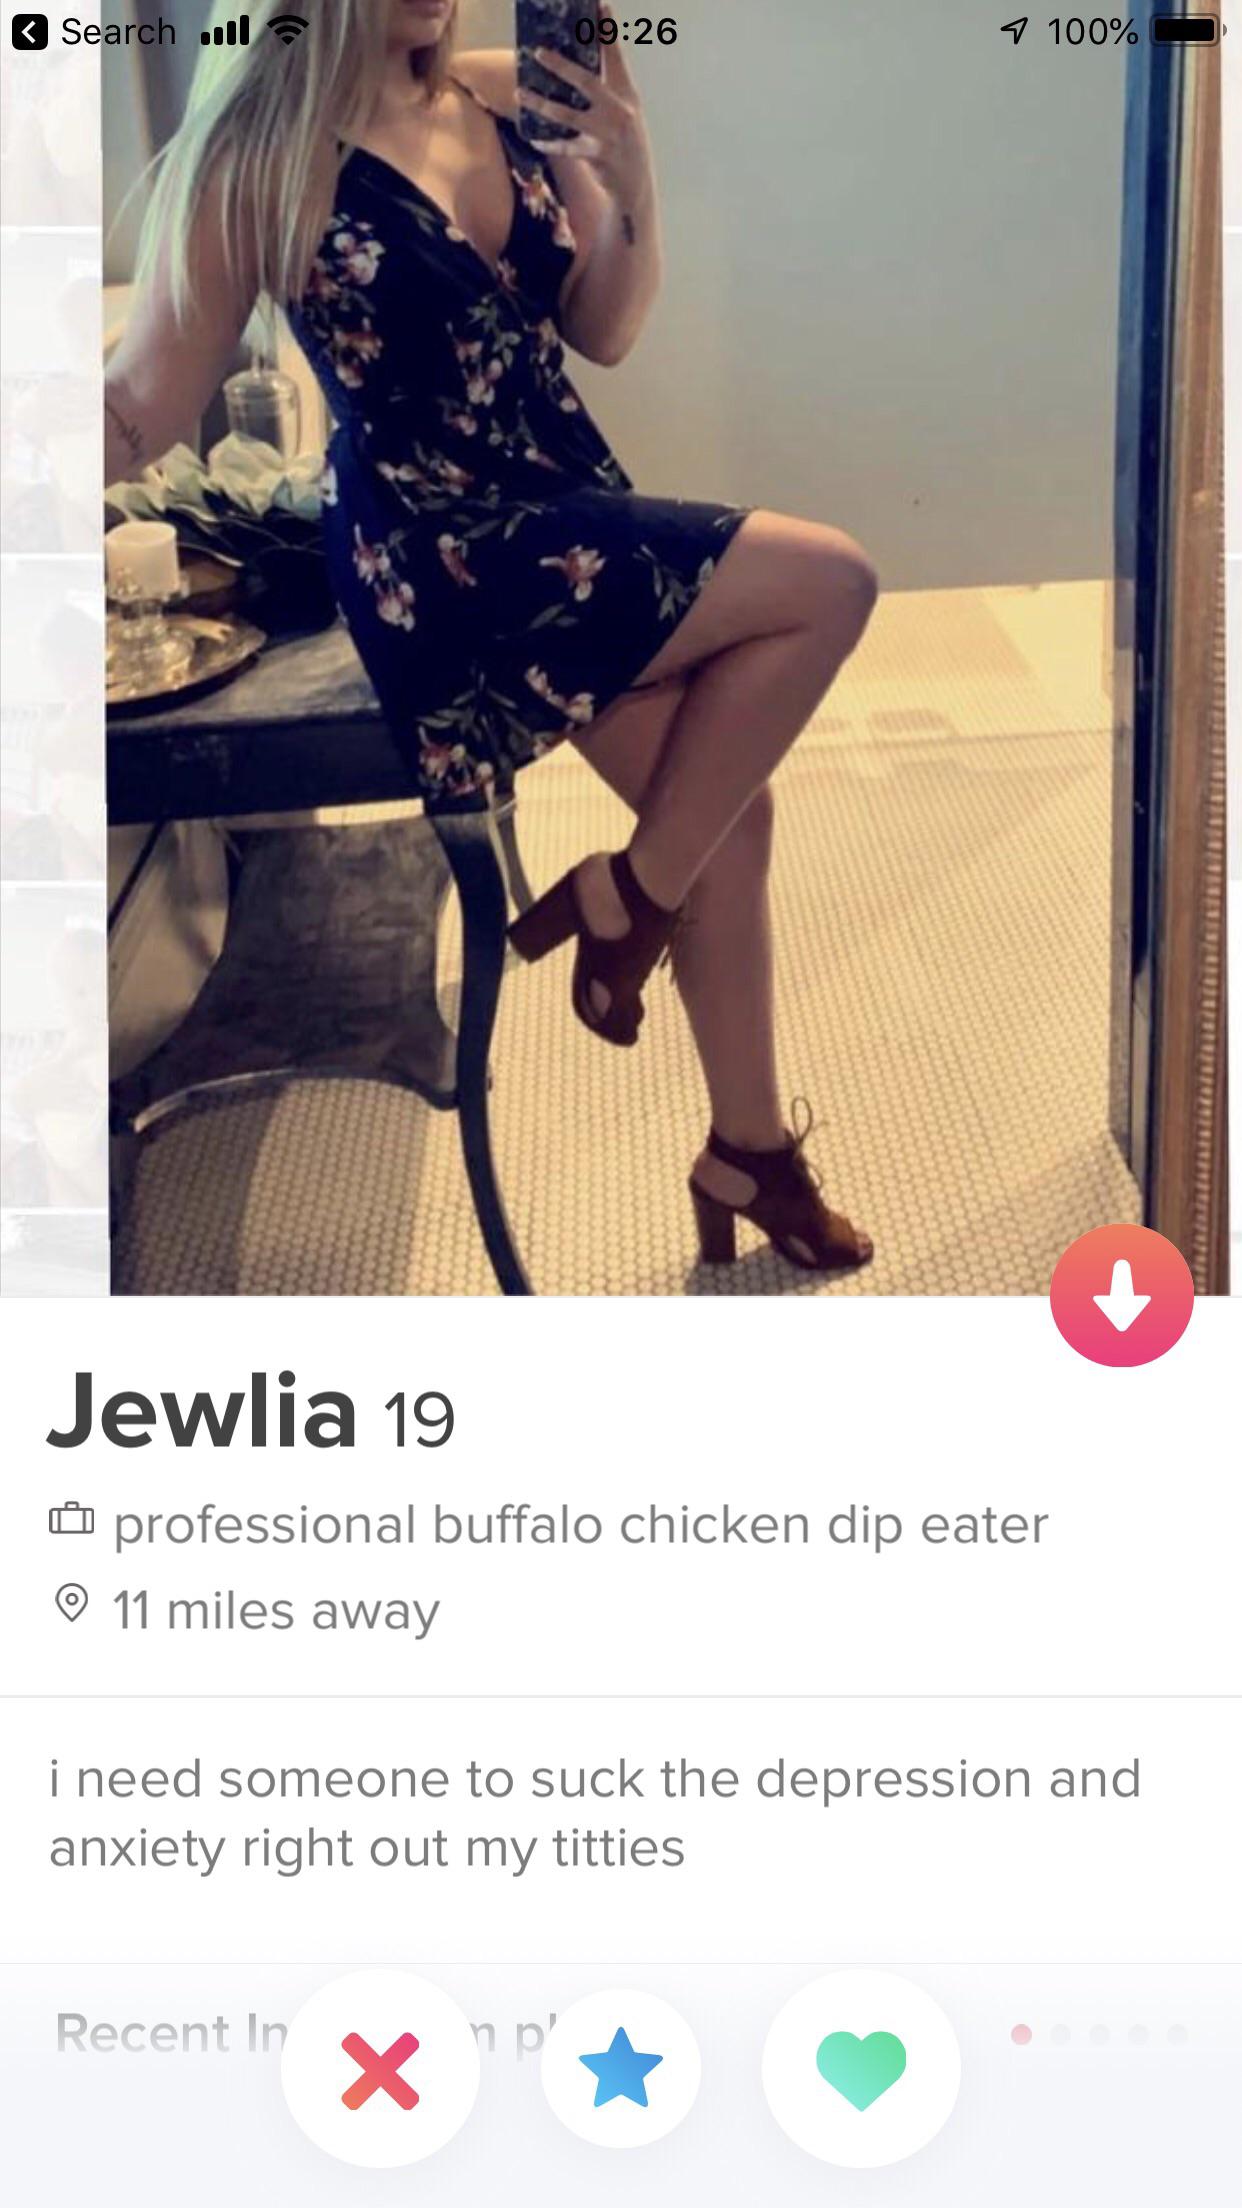 tinder wins and fails -Jewlia 19 O professional buffalo chicken dip eater 11 miles away i need someone to suck the depression and anxiety right out my titties